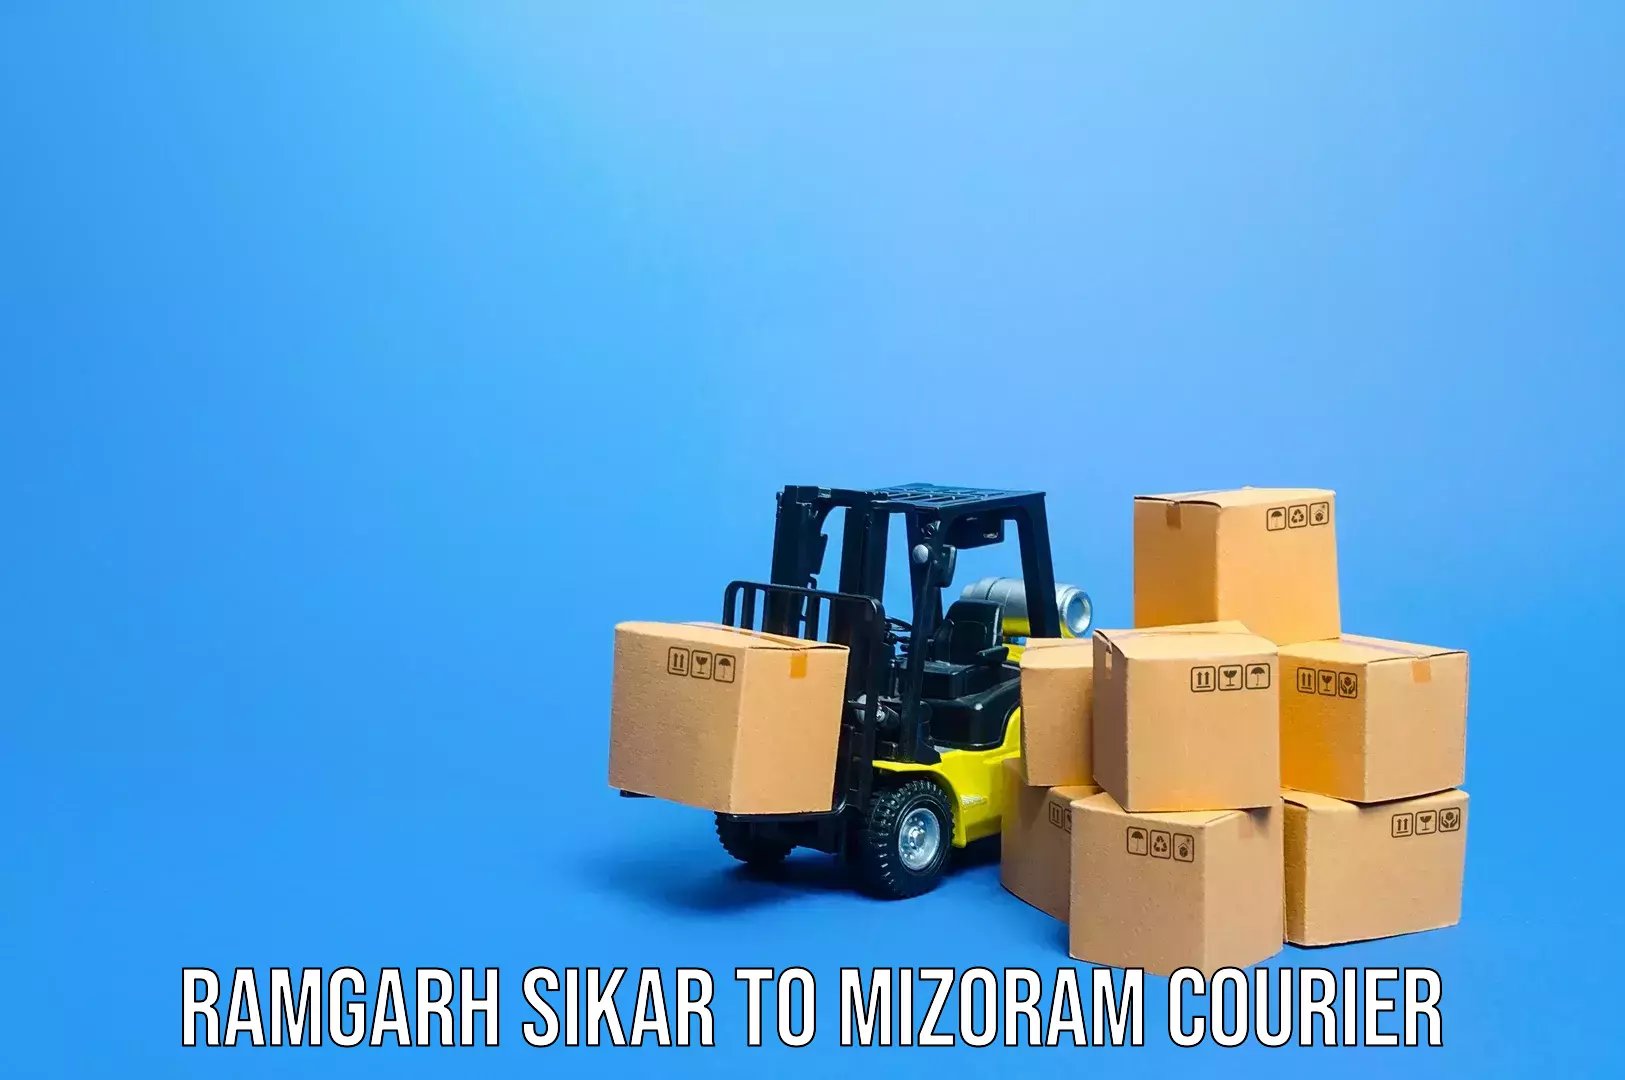 Luggage shipping specialists Ramgarh Sikar to Serchhip